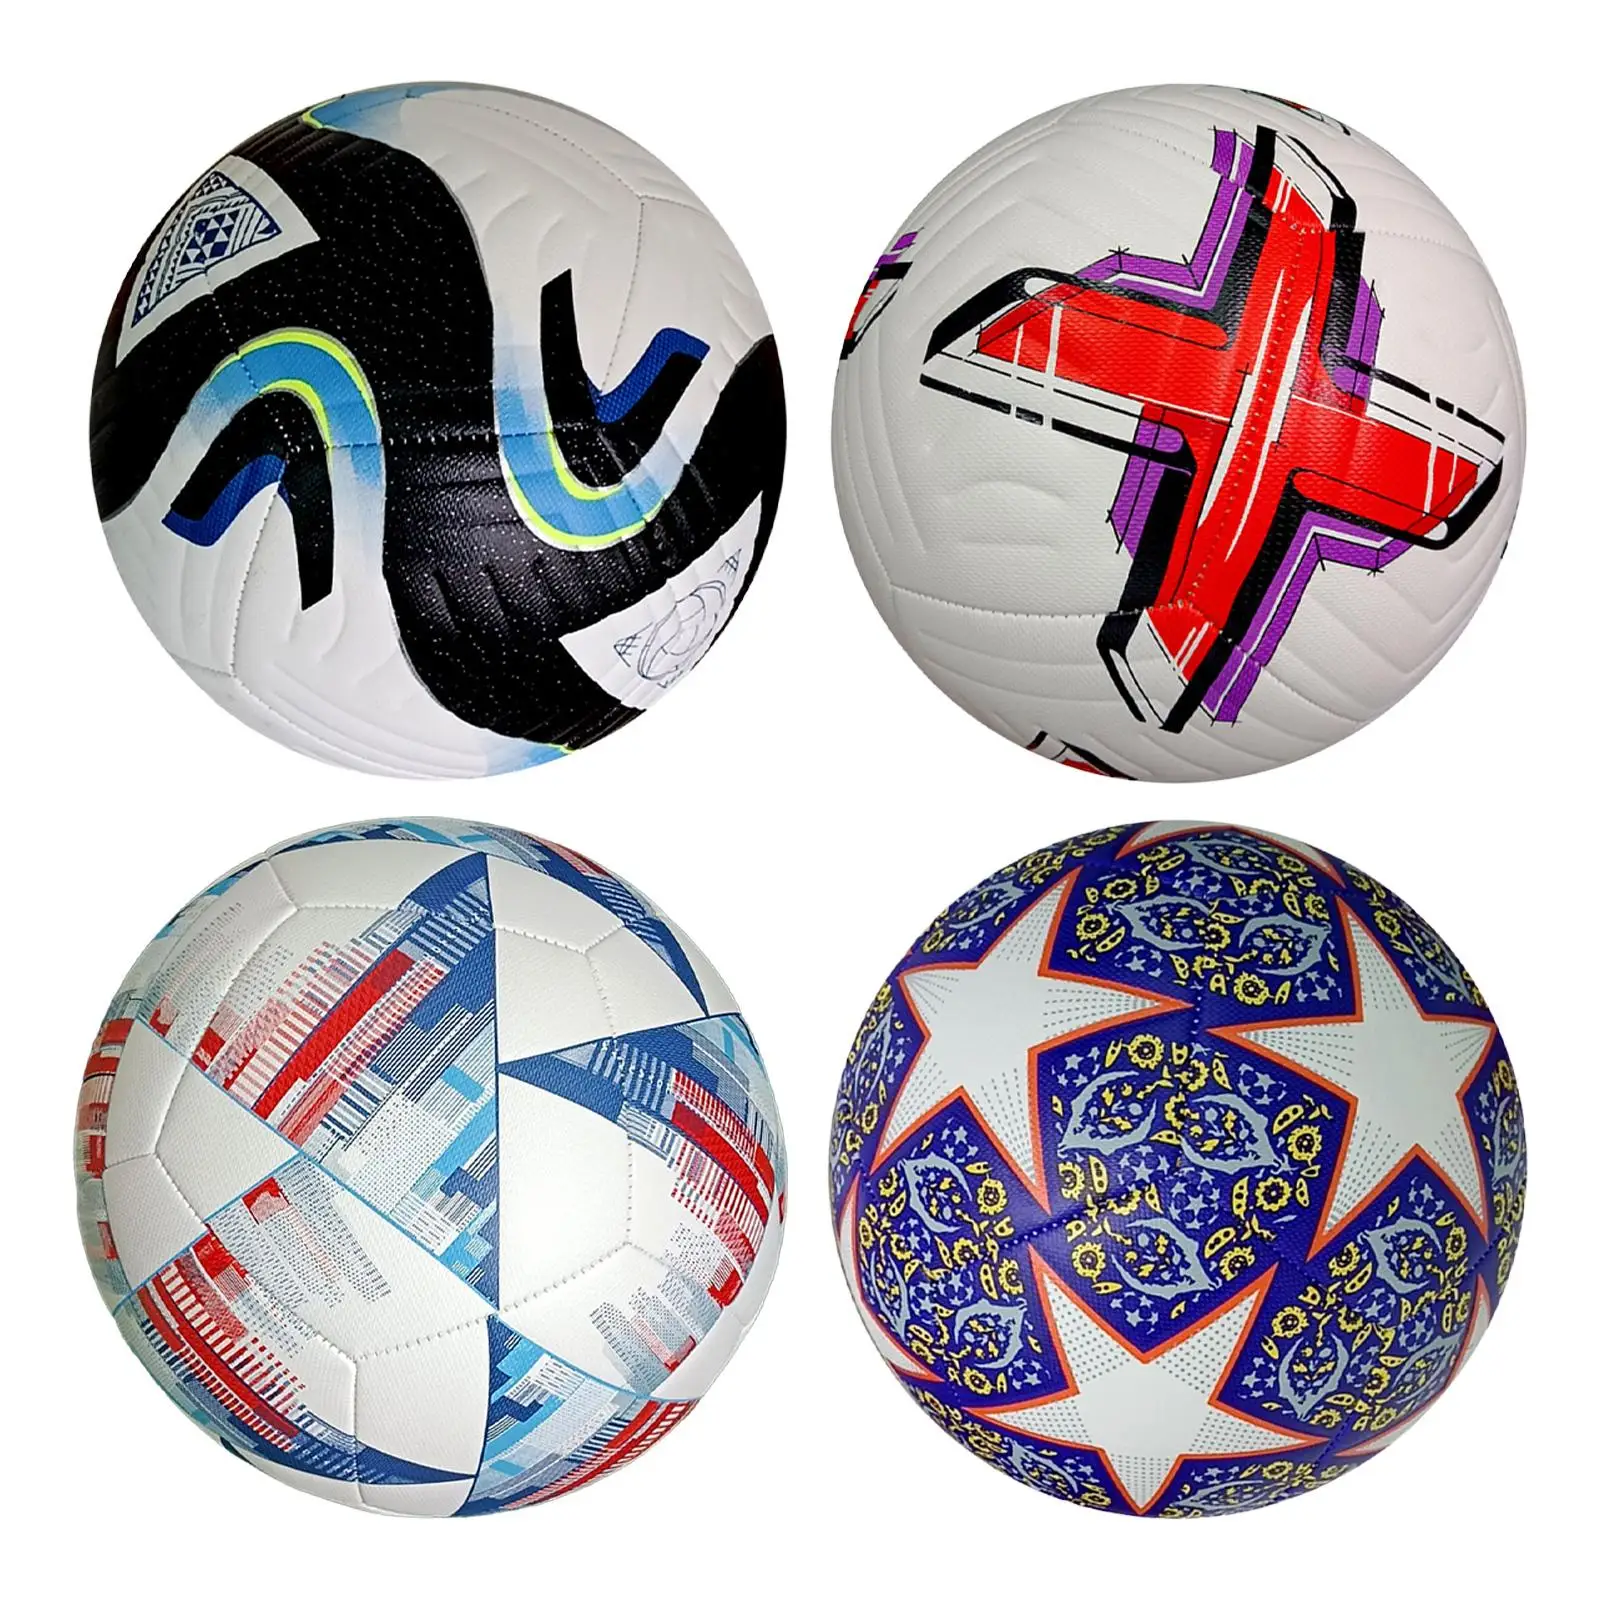 Soccer Ball Size 5 Durable PU Leather Machine Stitched Professional Match Ball for Game Competition Indoor Outdoor Playing